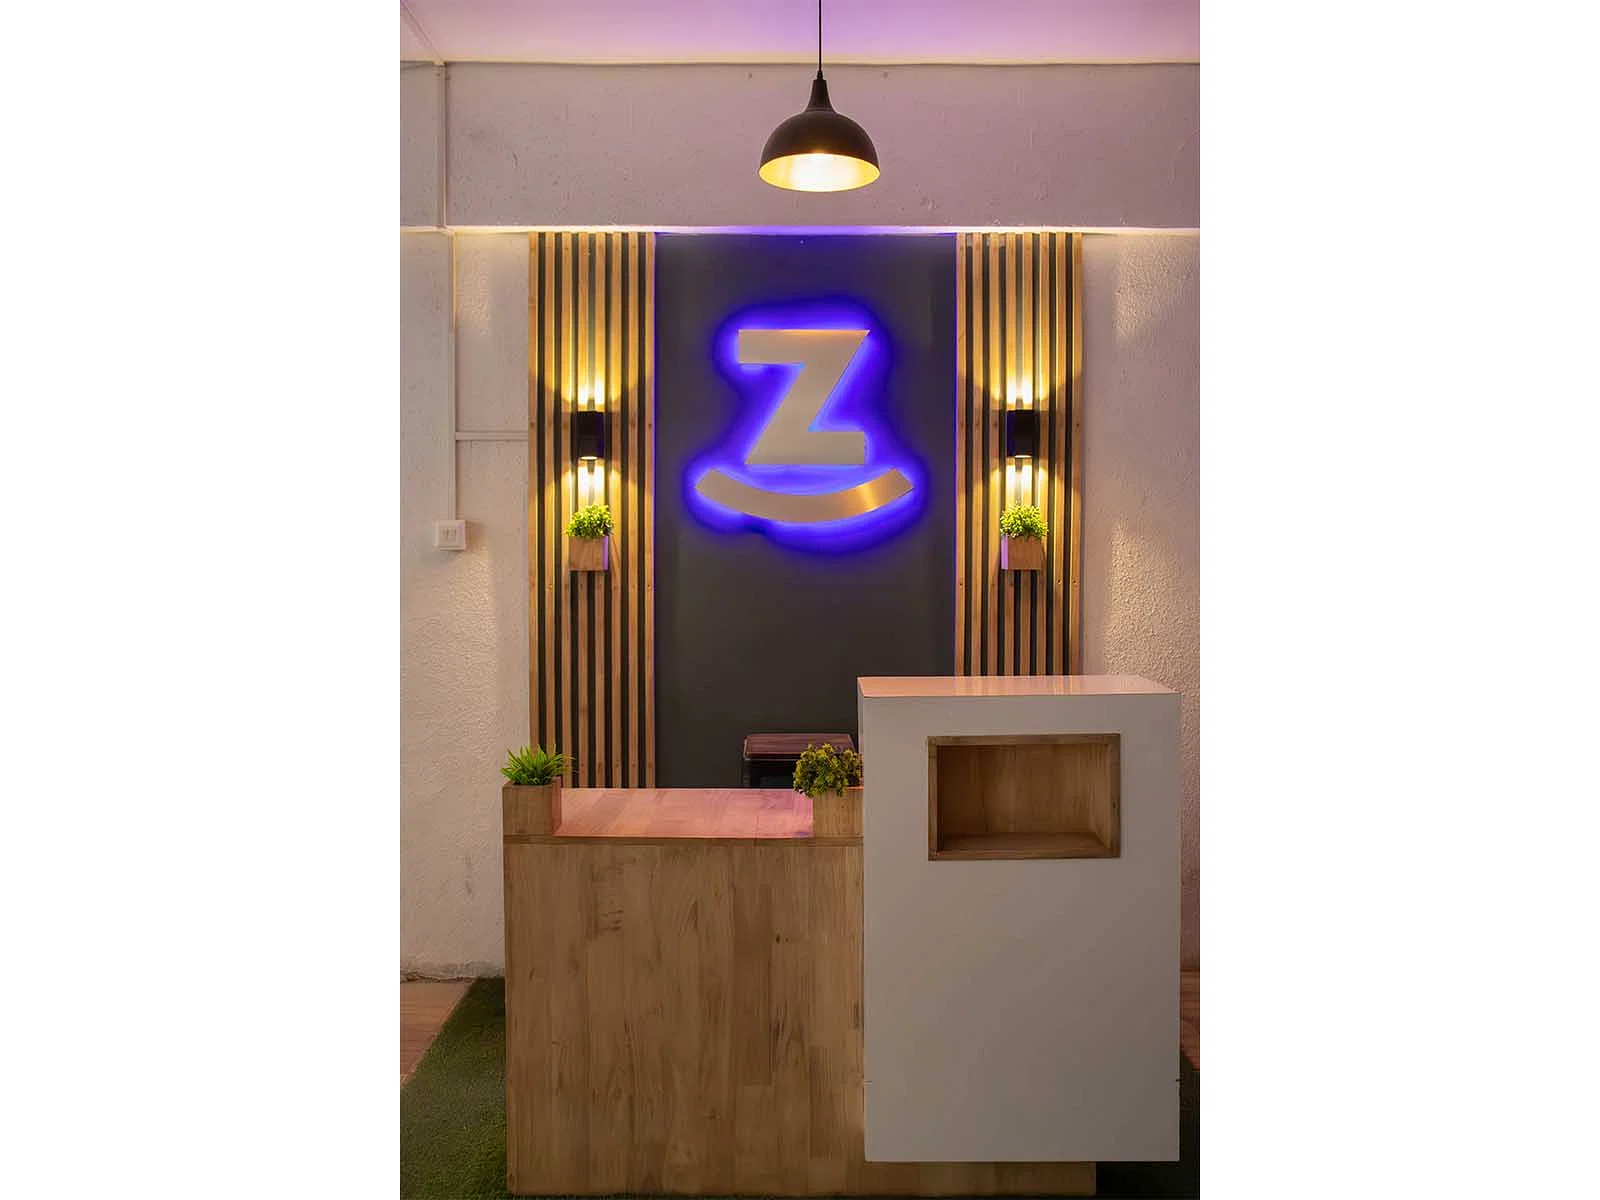 safe and affordable hostels for men and women students with 24/7 security and CCTV surveillance-Zolo Gen Z